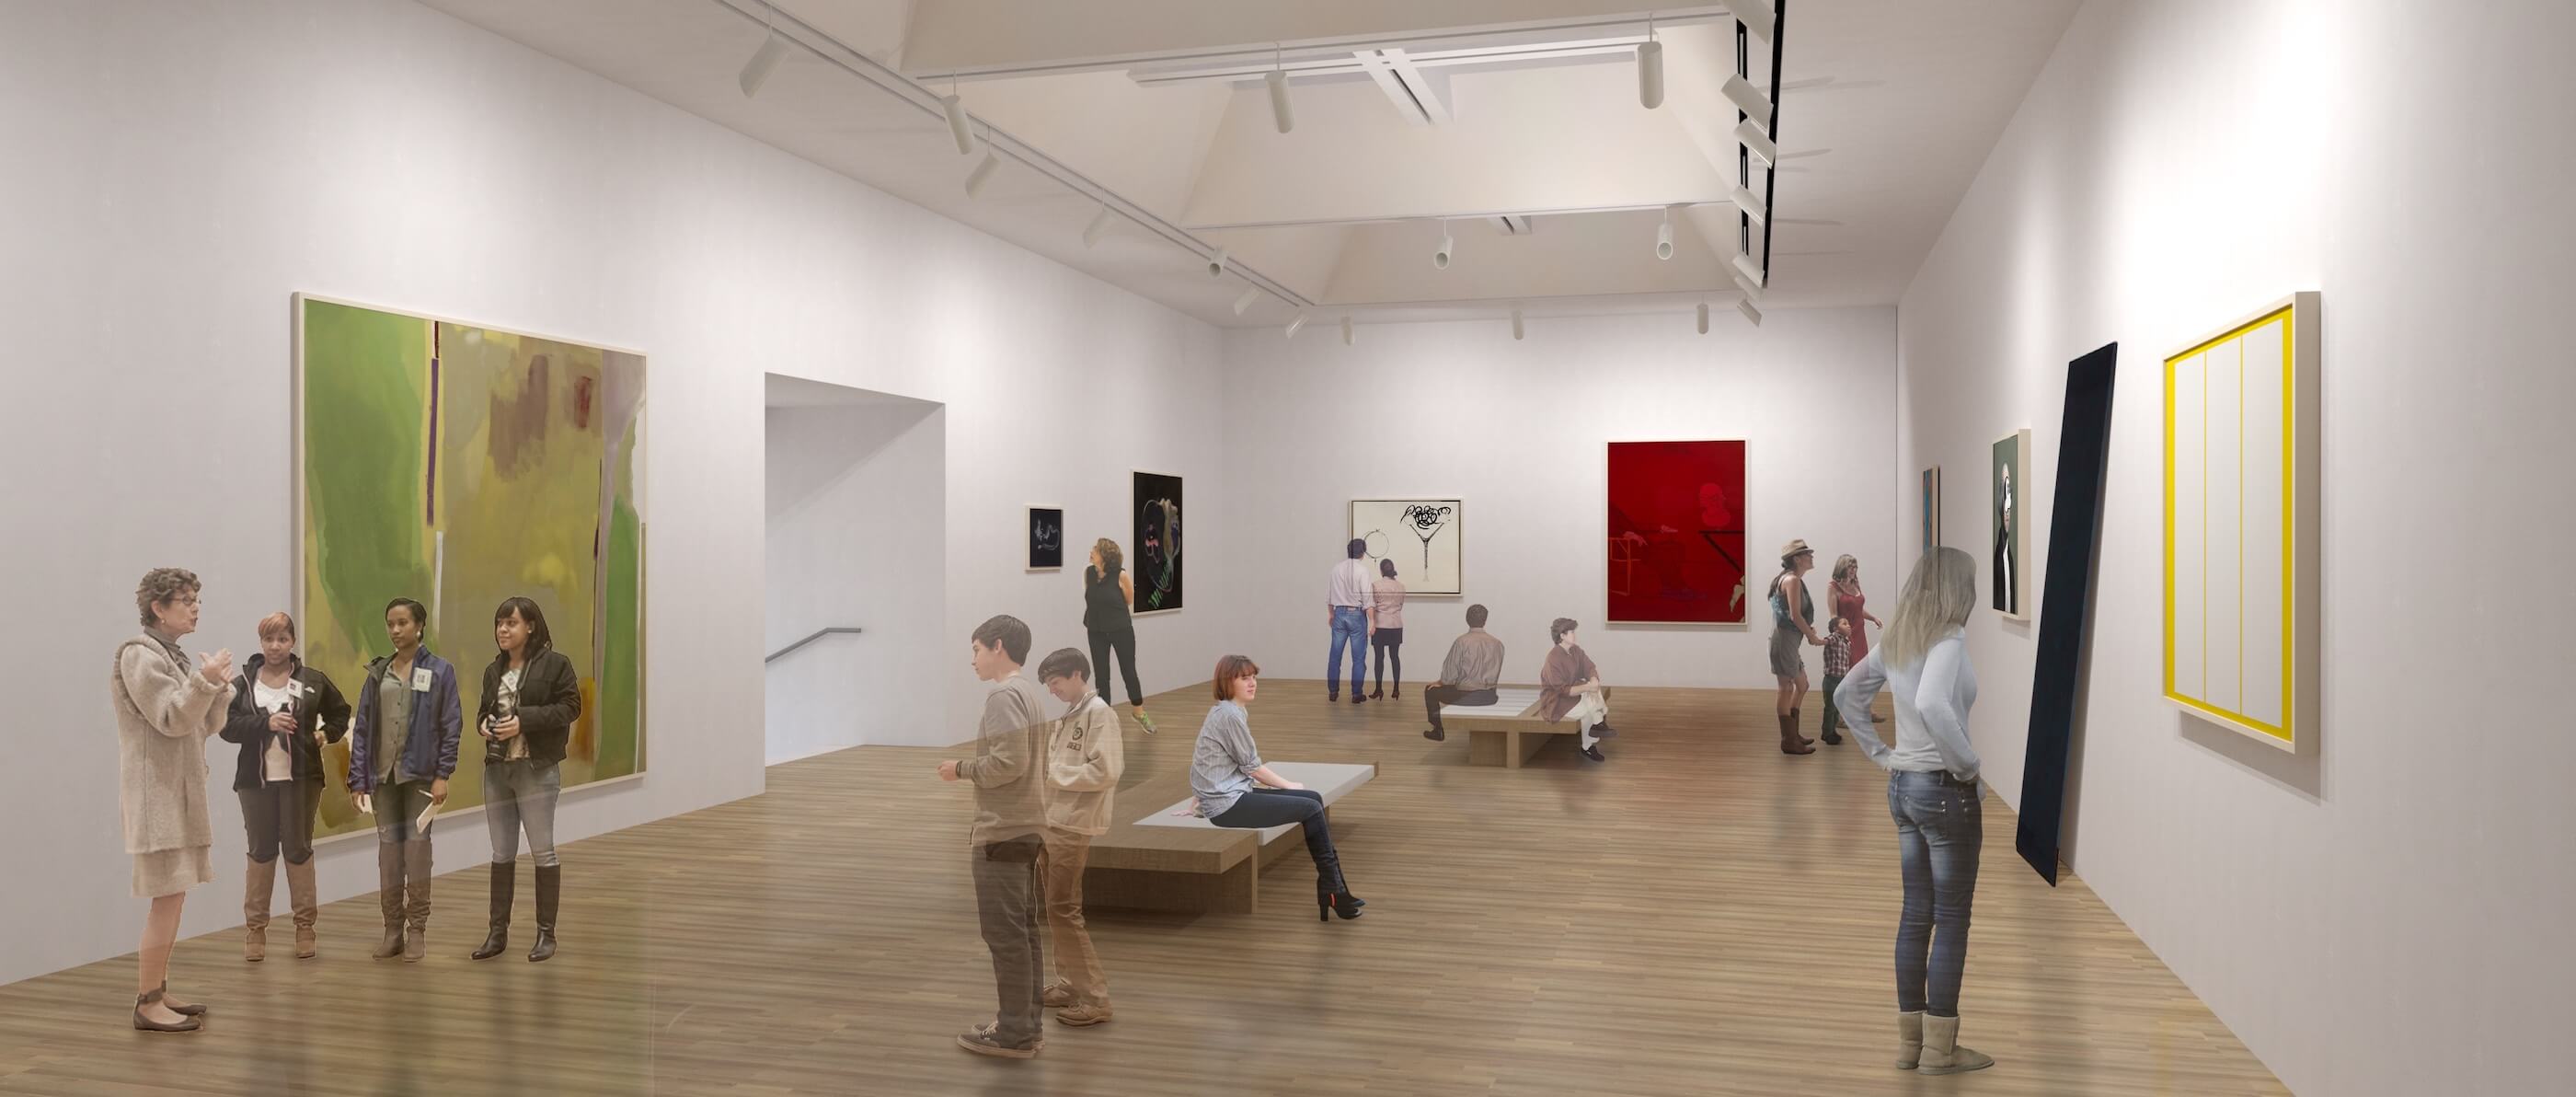 rendering of visitors observing art in a gallery space